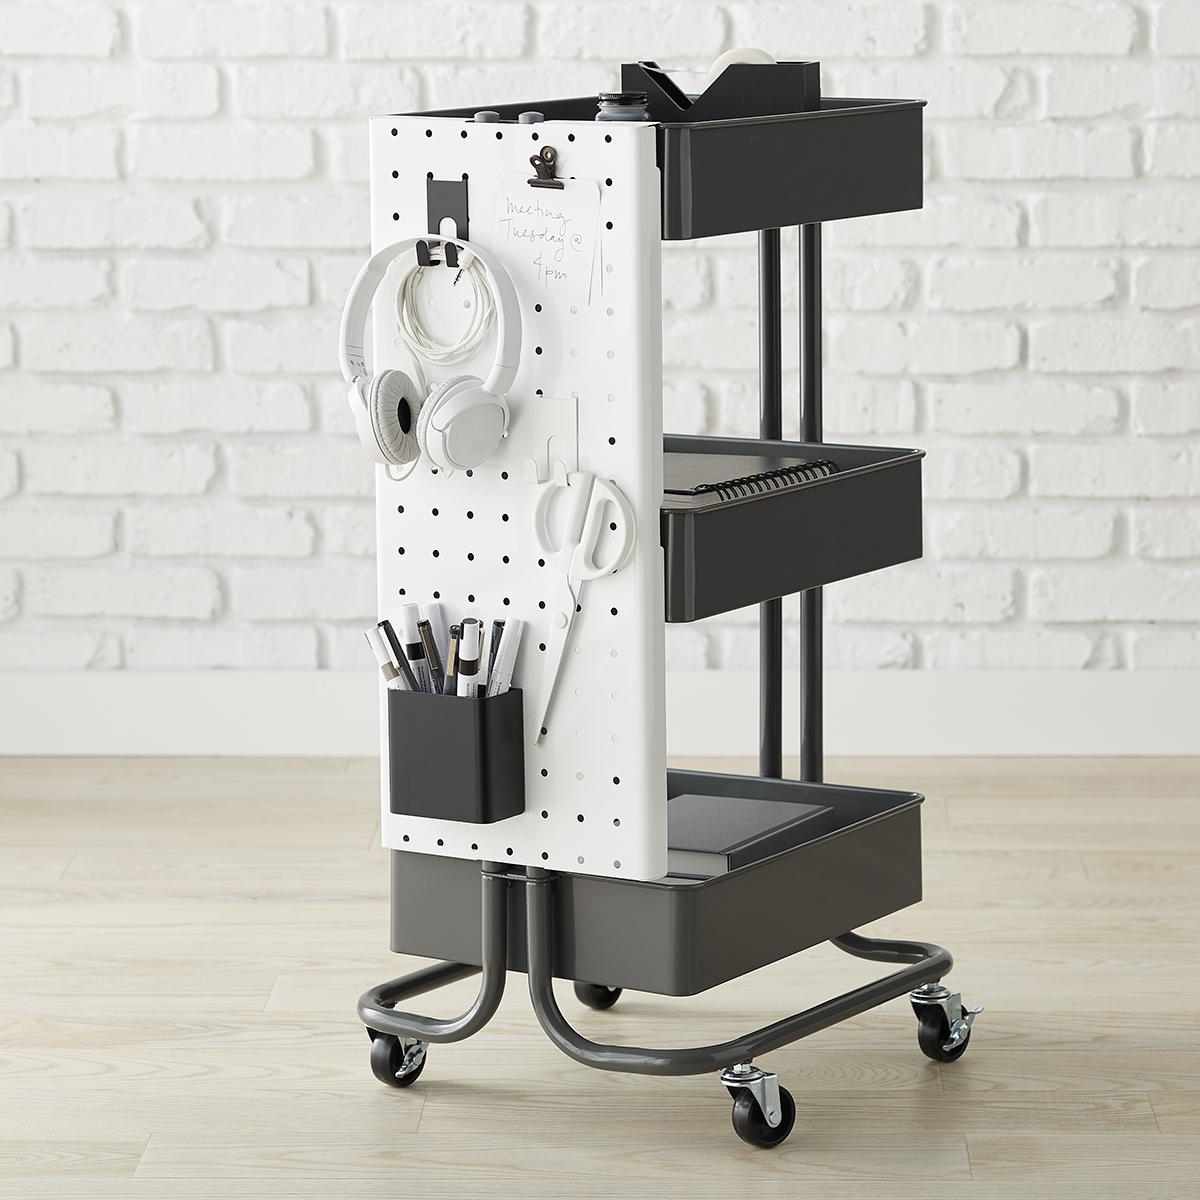 https://www.containerstore.com/catalogimages/415233/10079693-3-tier-cart-peg-board-attac.jpg